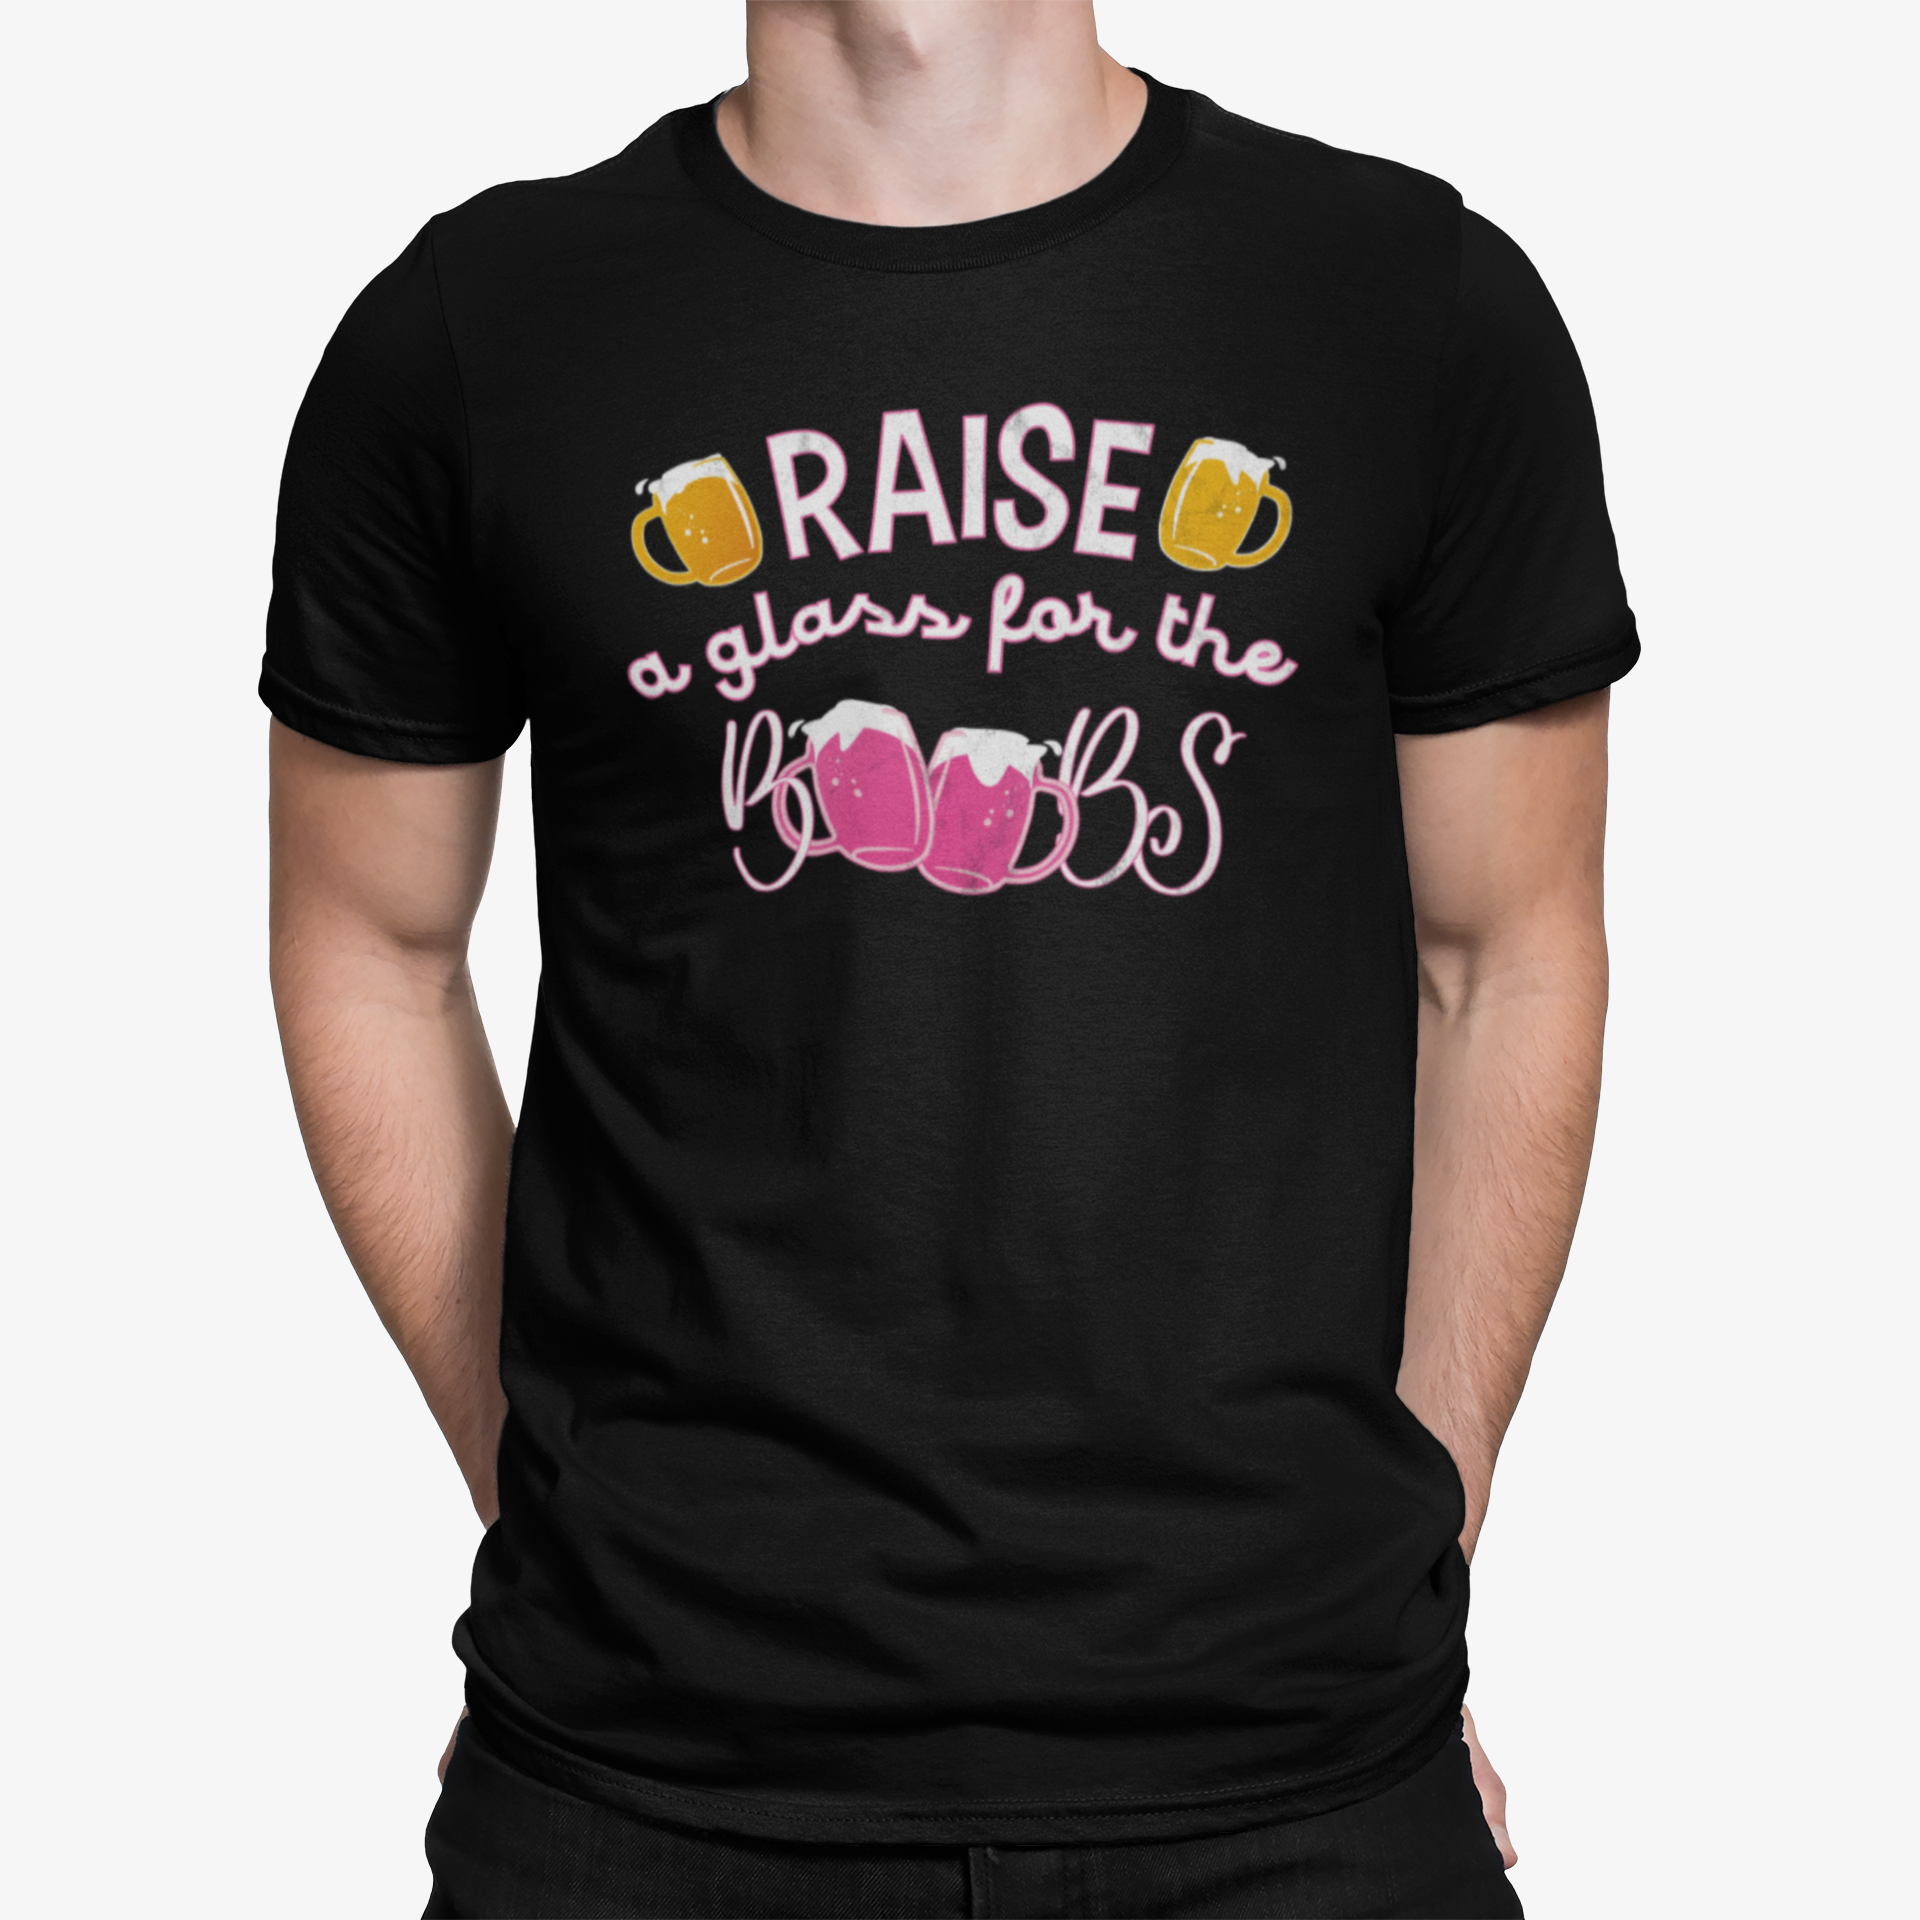 Black Raise A Glass For The Boobs Breast Cancer Awareness T-Shirt